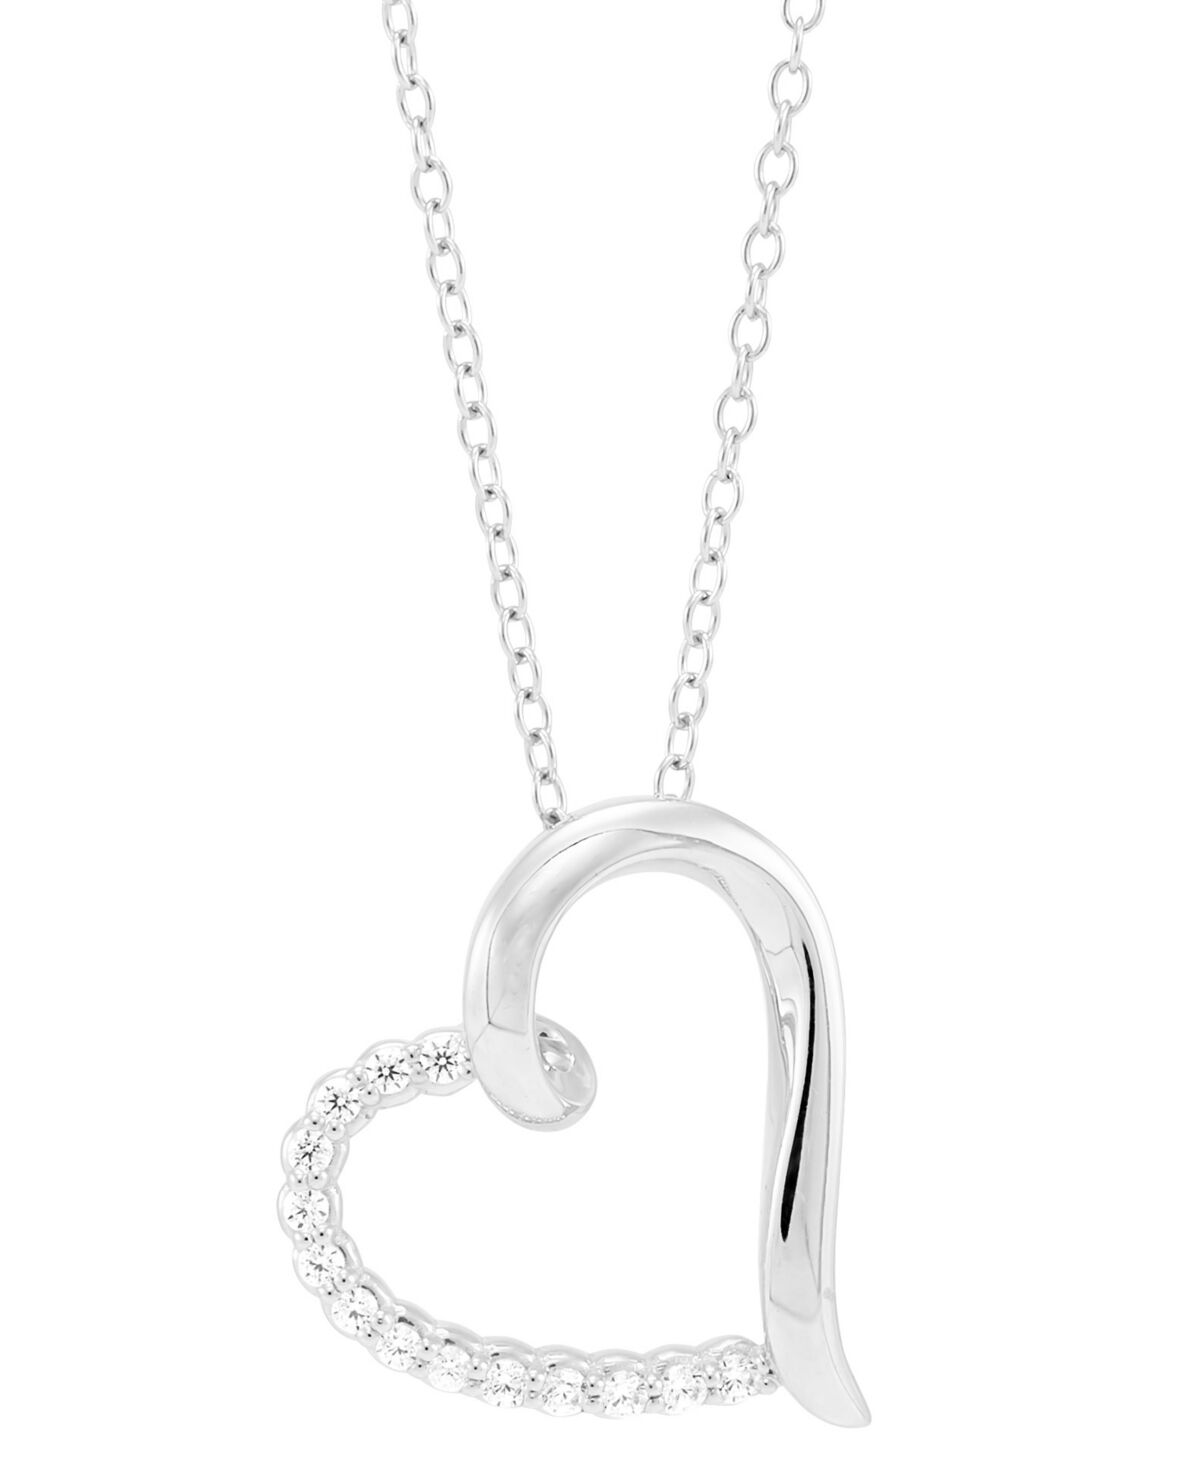 Macy's Diamond Polished Heart Pendant Necklace (1/10 ct. t.w.) in Sterling Silver, 16